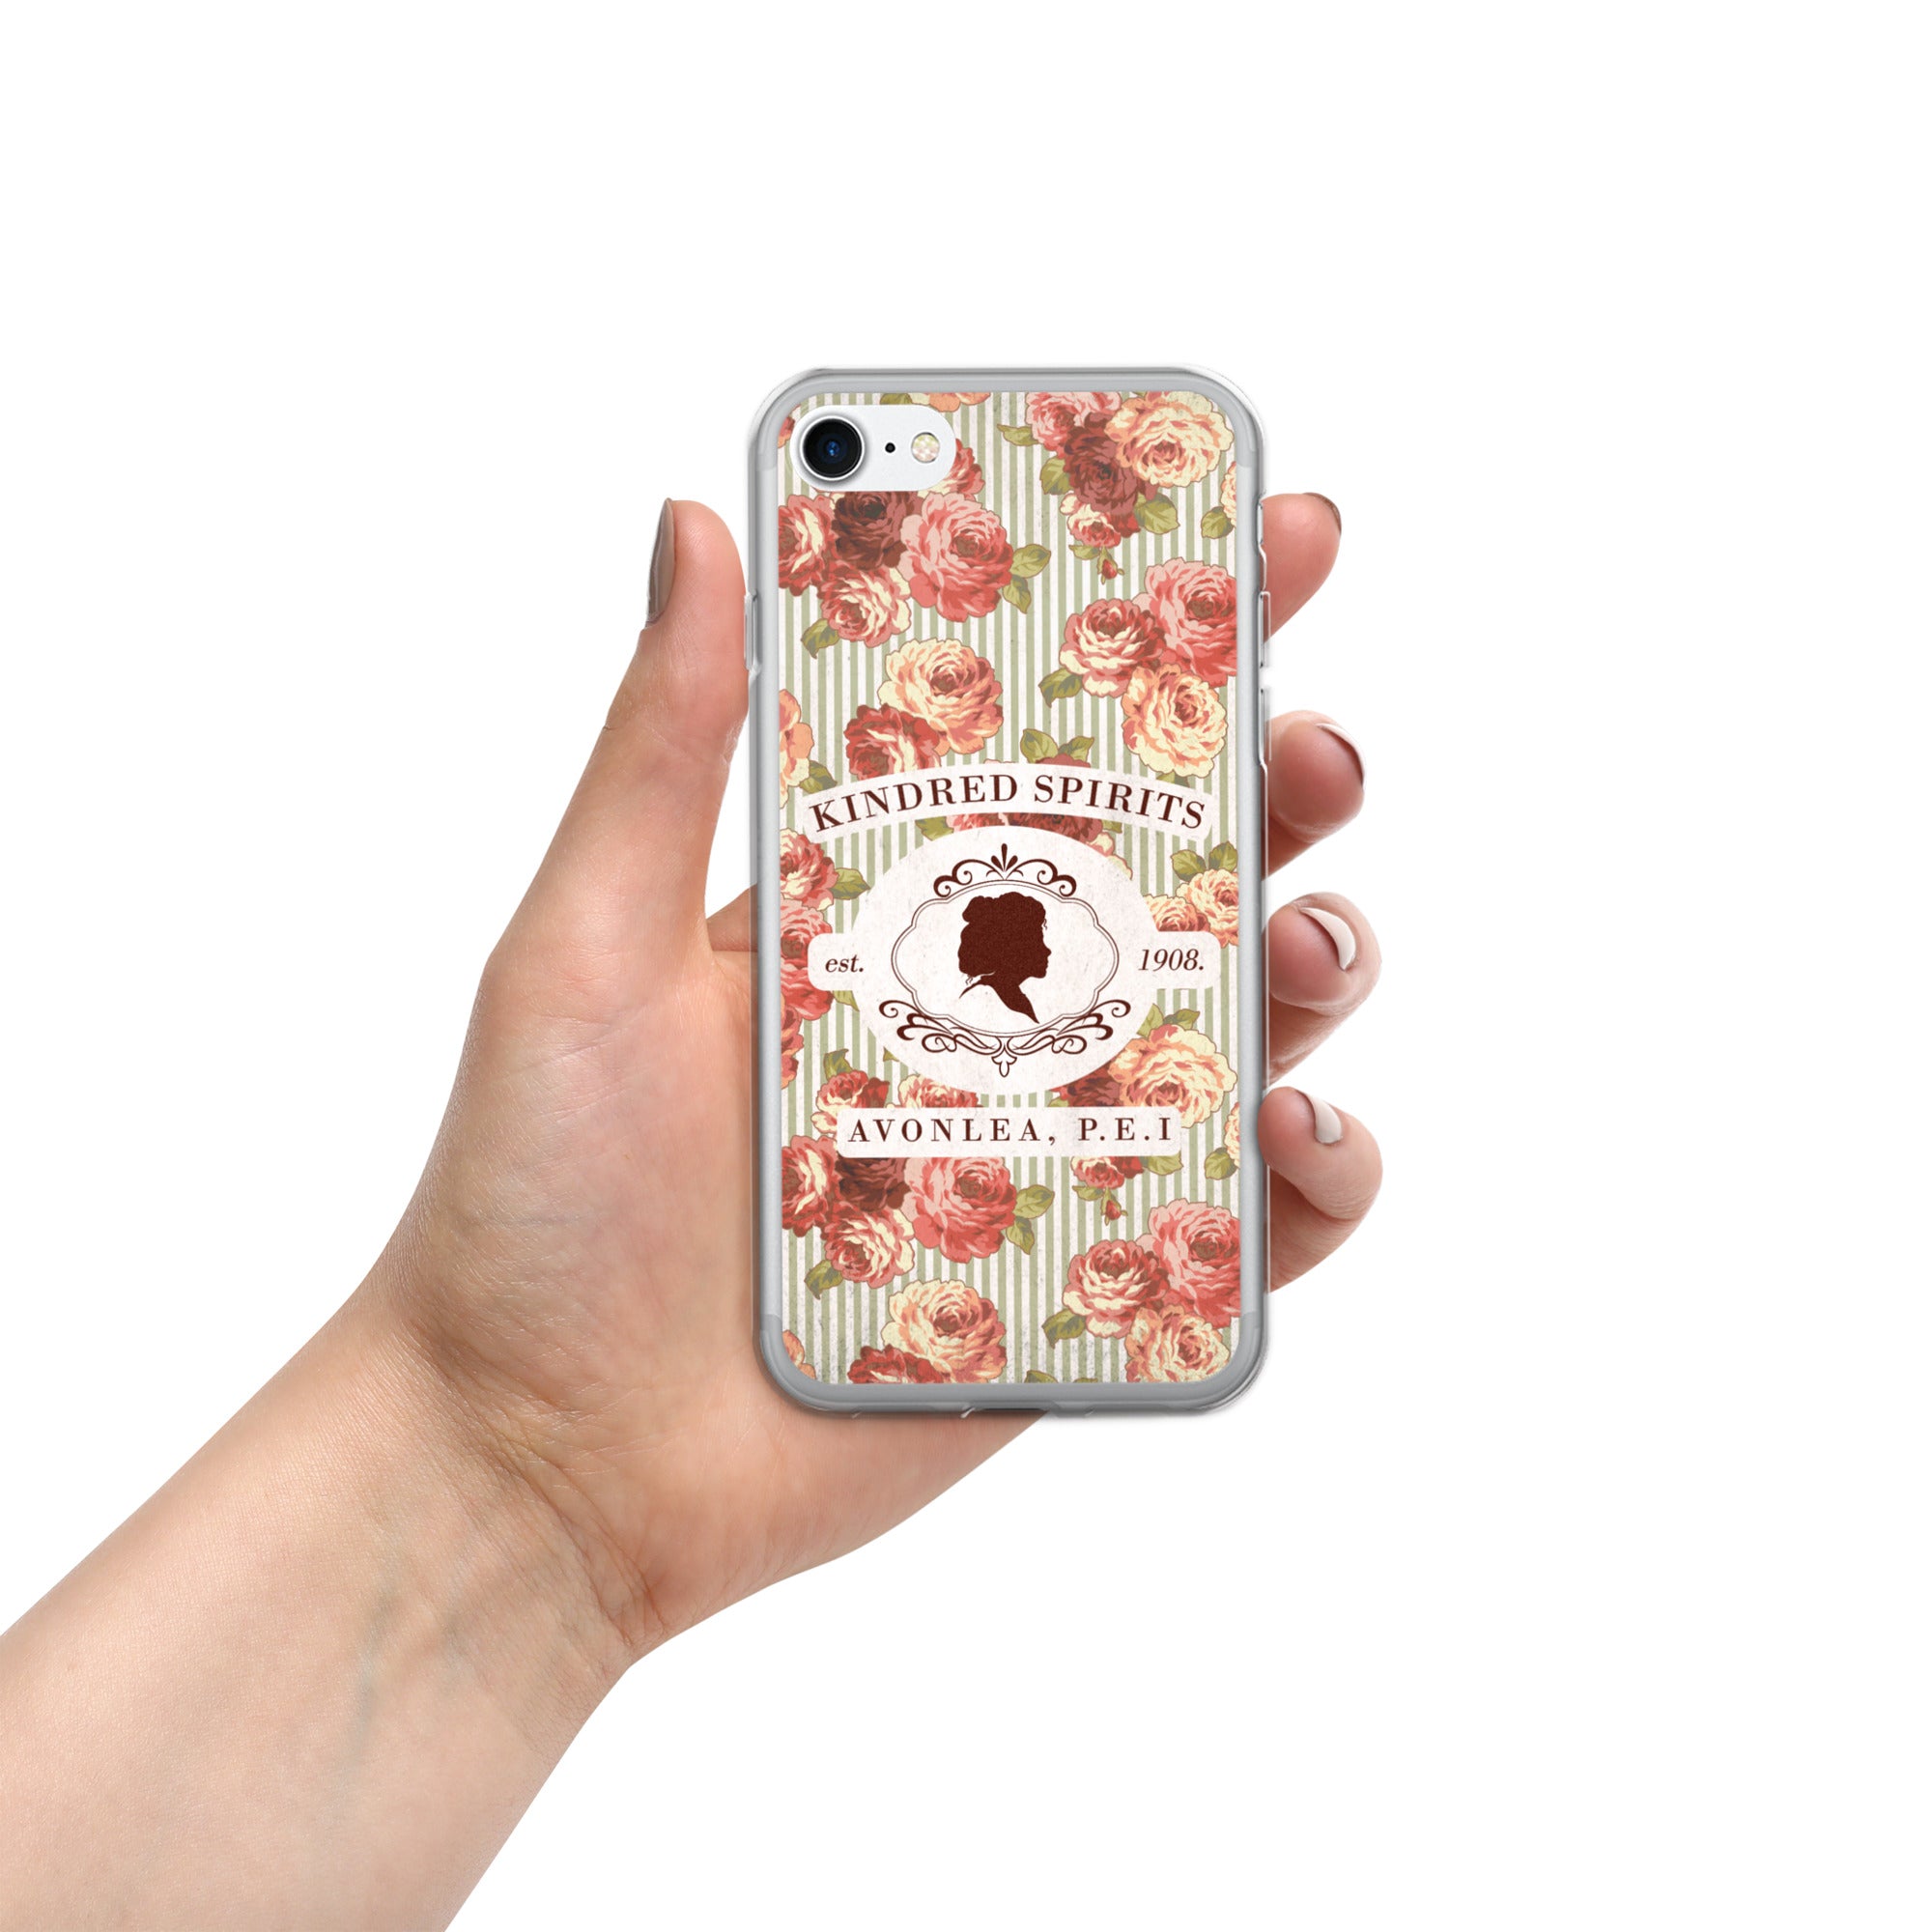 Kindred Spirits iPhone Case